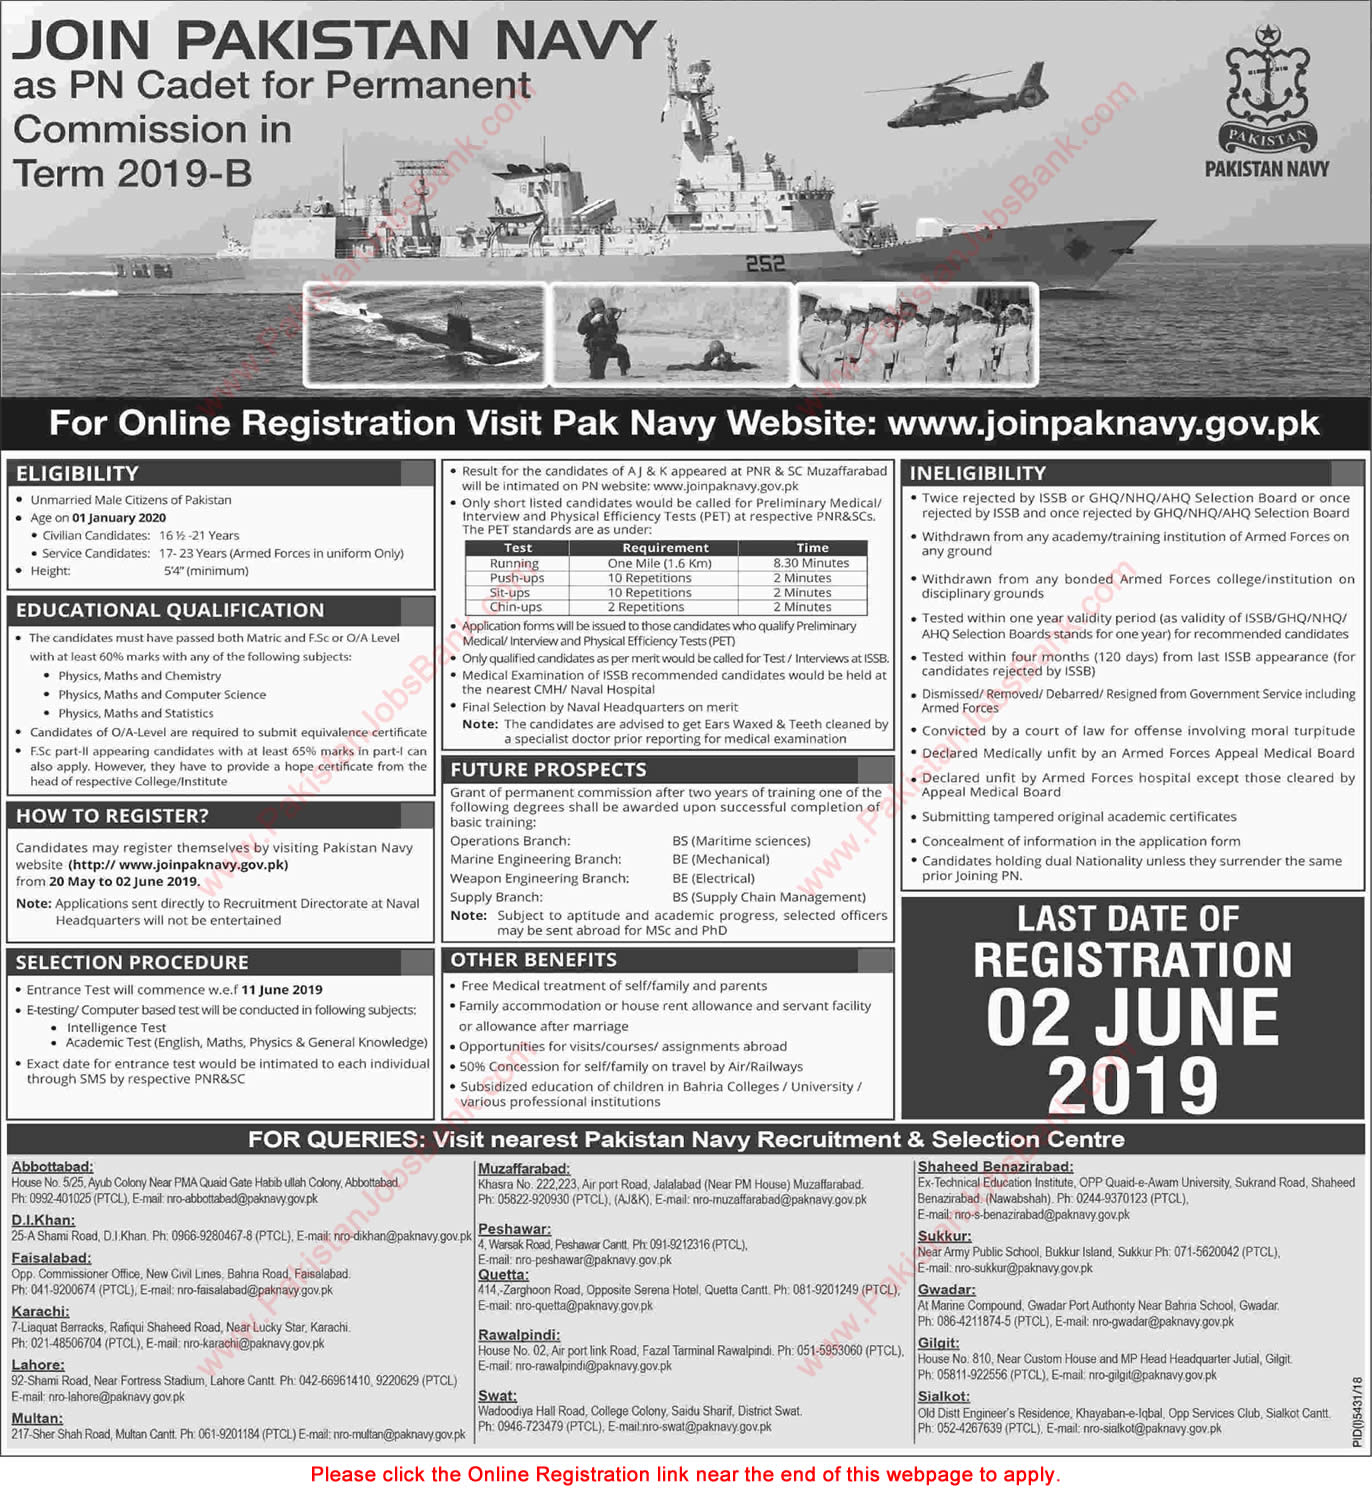 Join Pakistan Navy as PN Cadet 2019 May Online Registration for Permanent Commission in Term 2019-B Latest